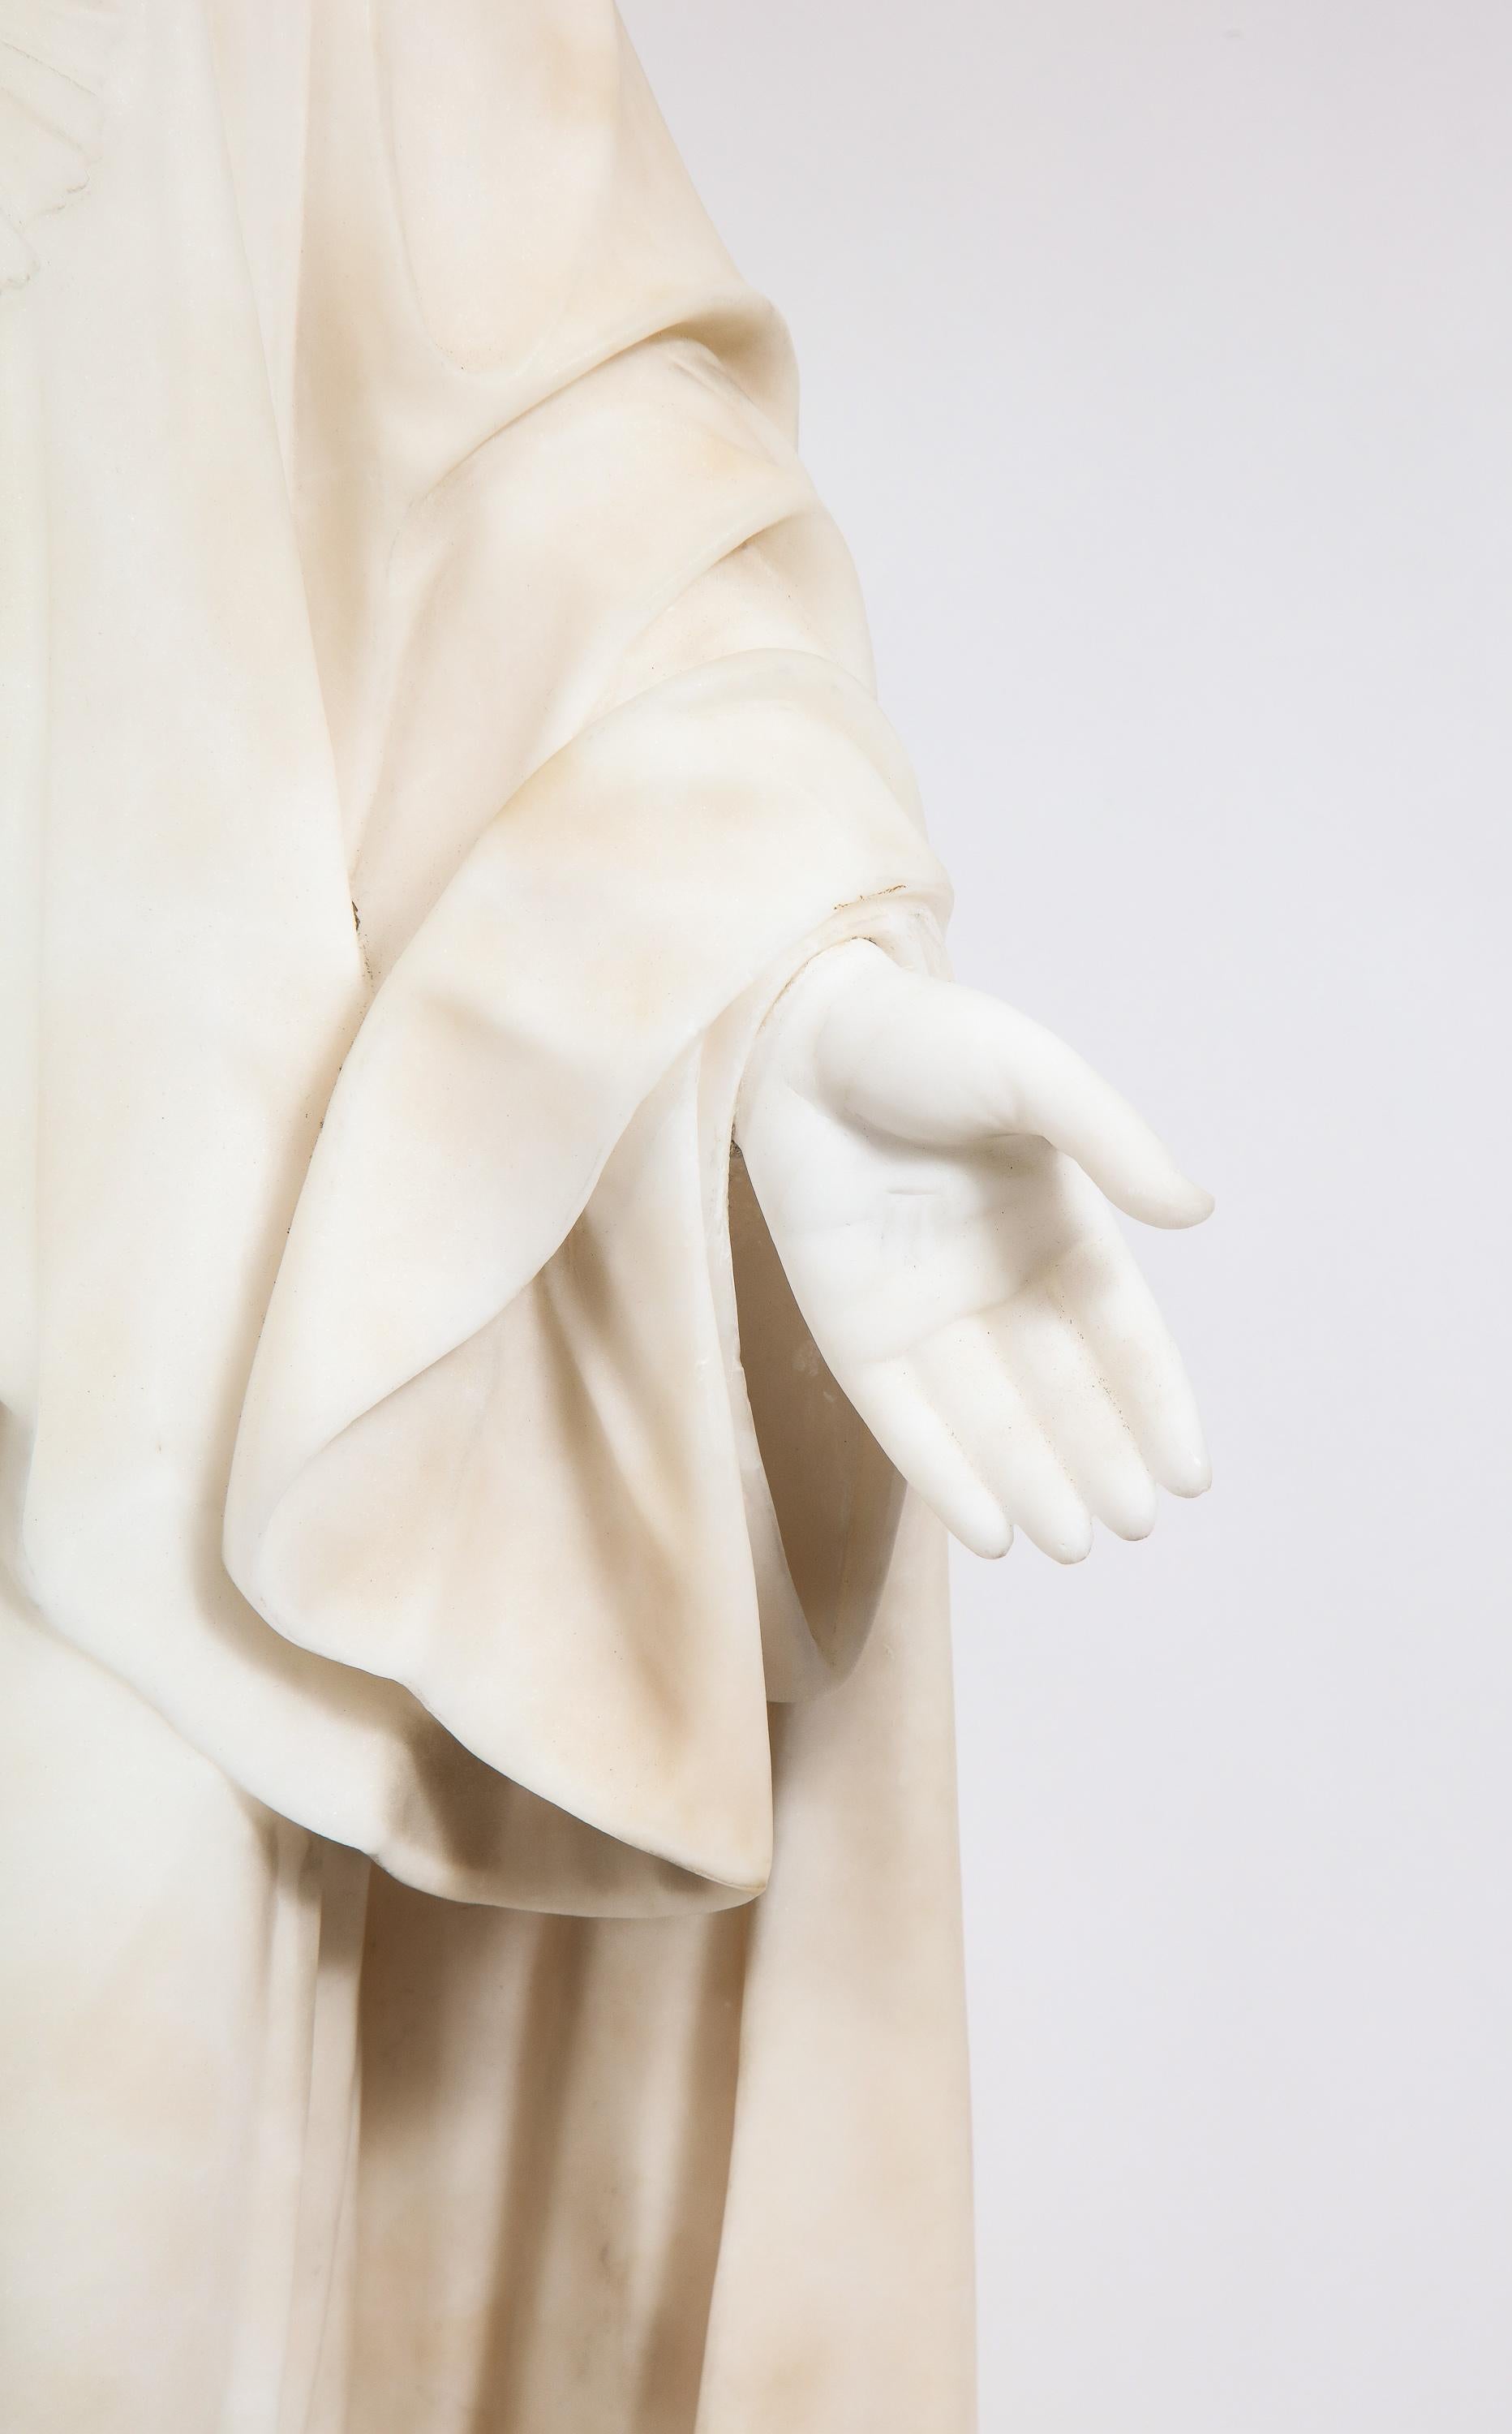 Italian Marble Sculpture Statue of Holy Jesus Christ, 19th Century. 

Exceptionally carved white-carrara marble sculpture depicting Jesus Christ standing with his palms open wearing his sacred heart. Marble from the 19th century, carved in Italy by